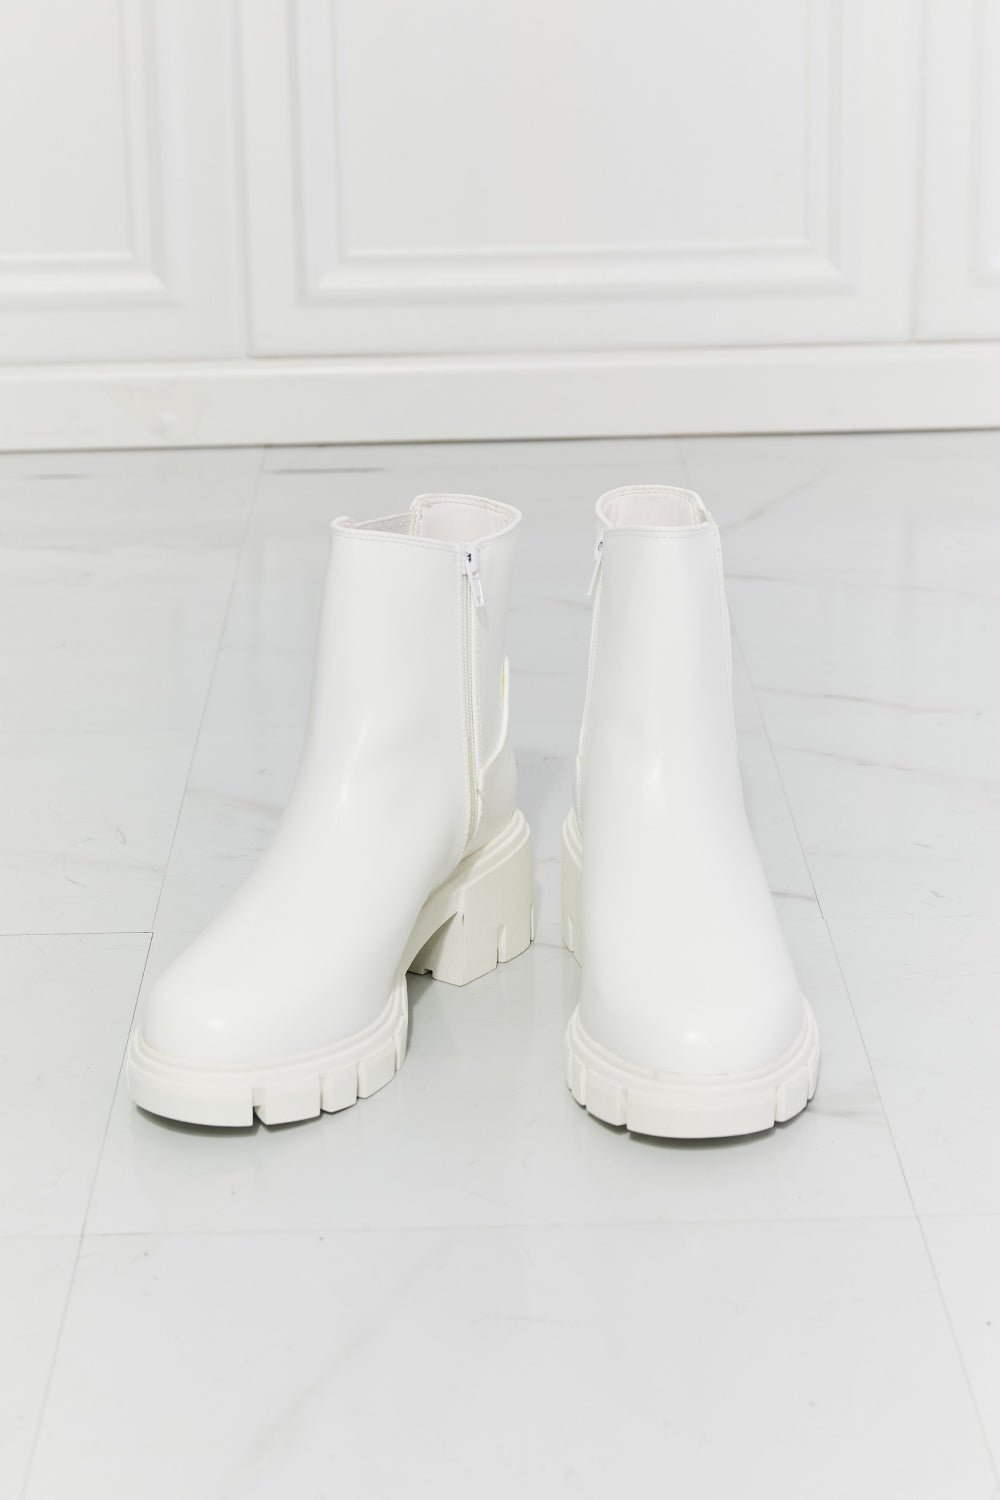 MMShoes What It Takes Lug Sole Chelsea Boots in White - GemThreads Boutique